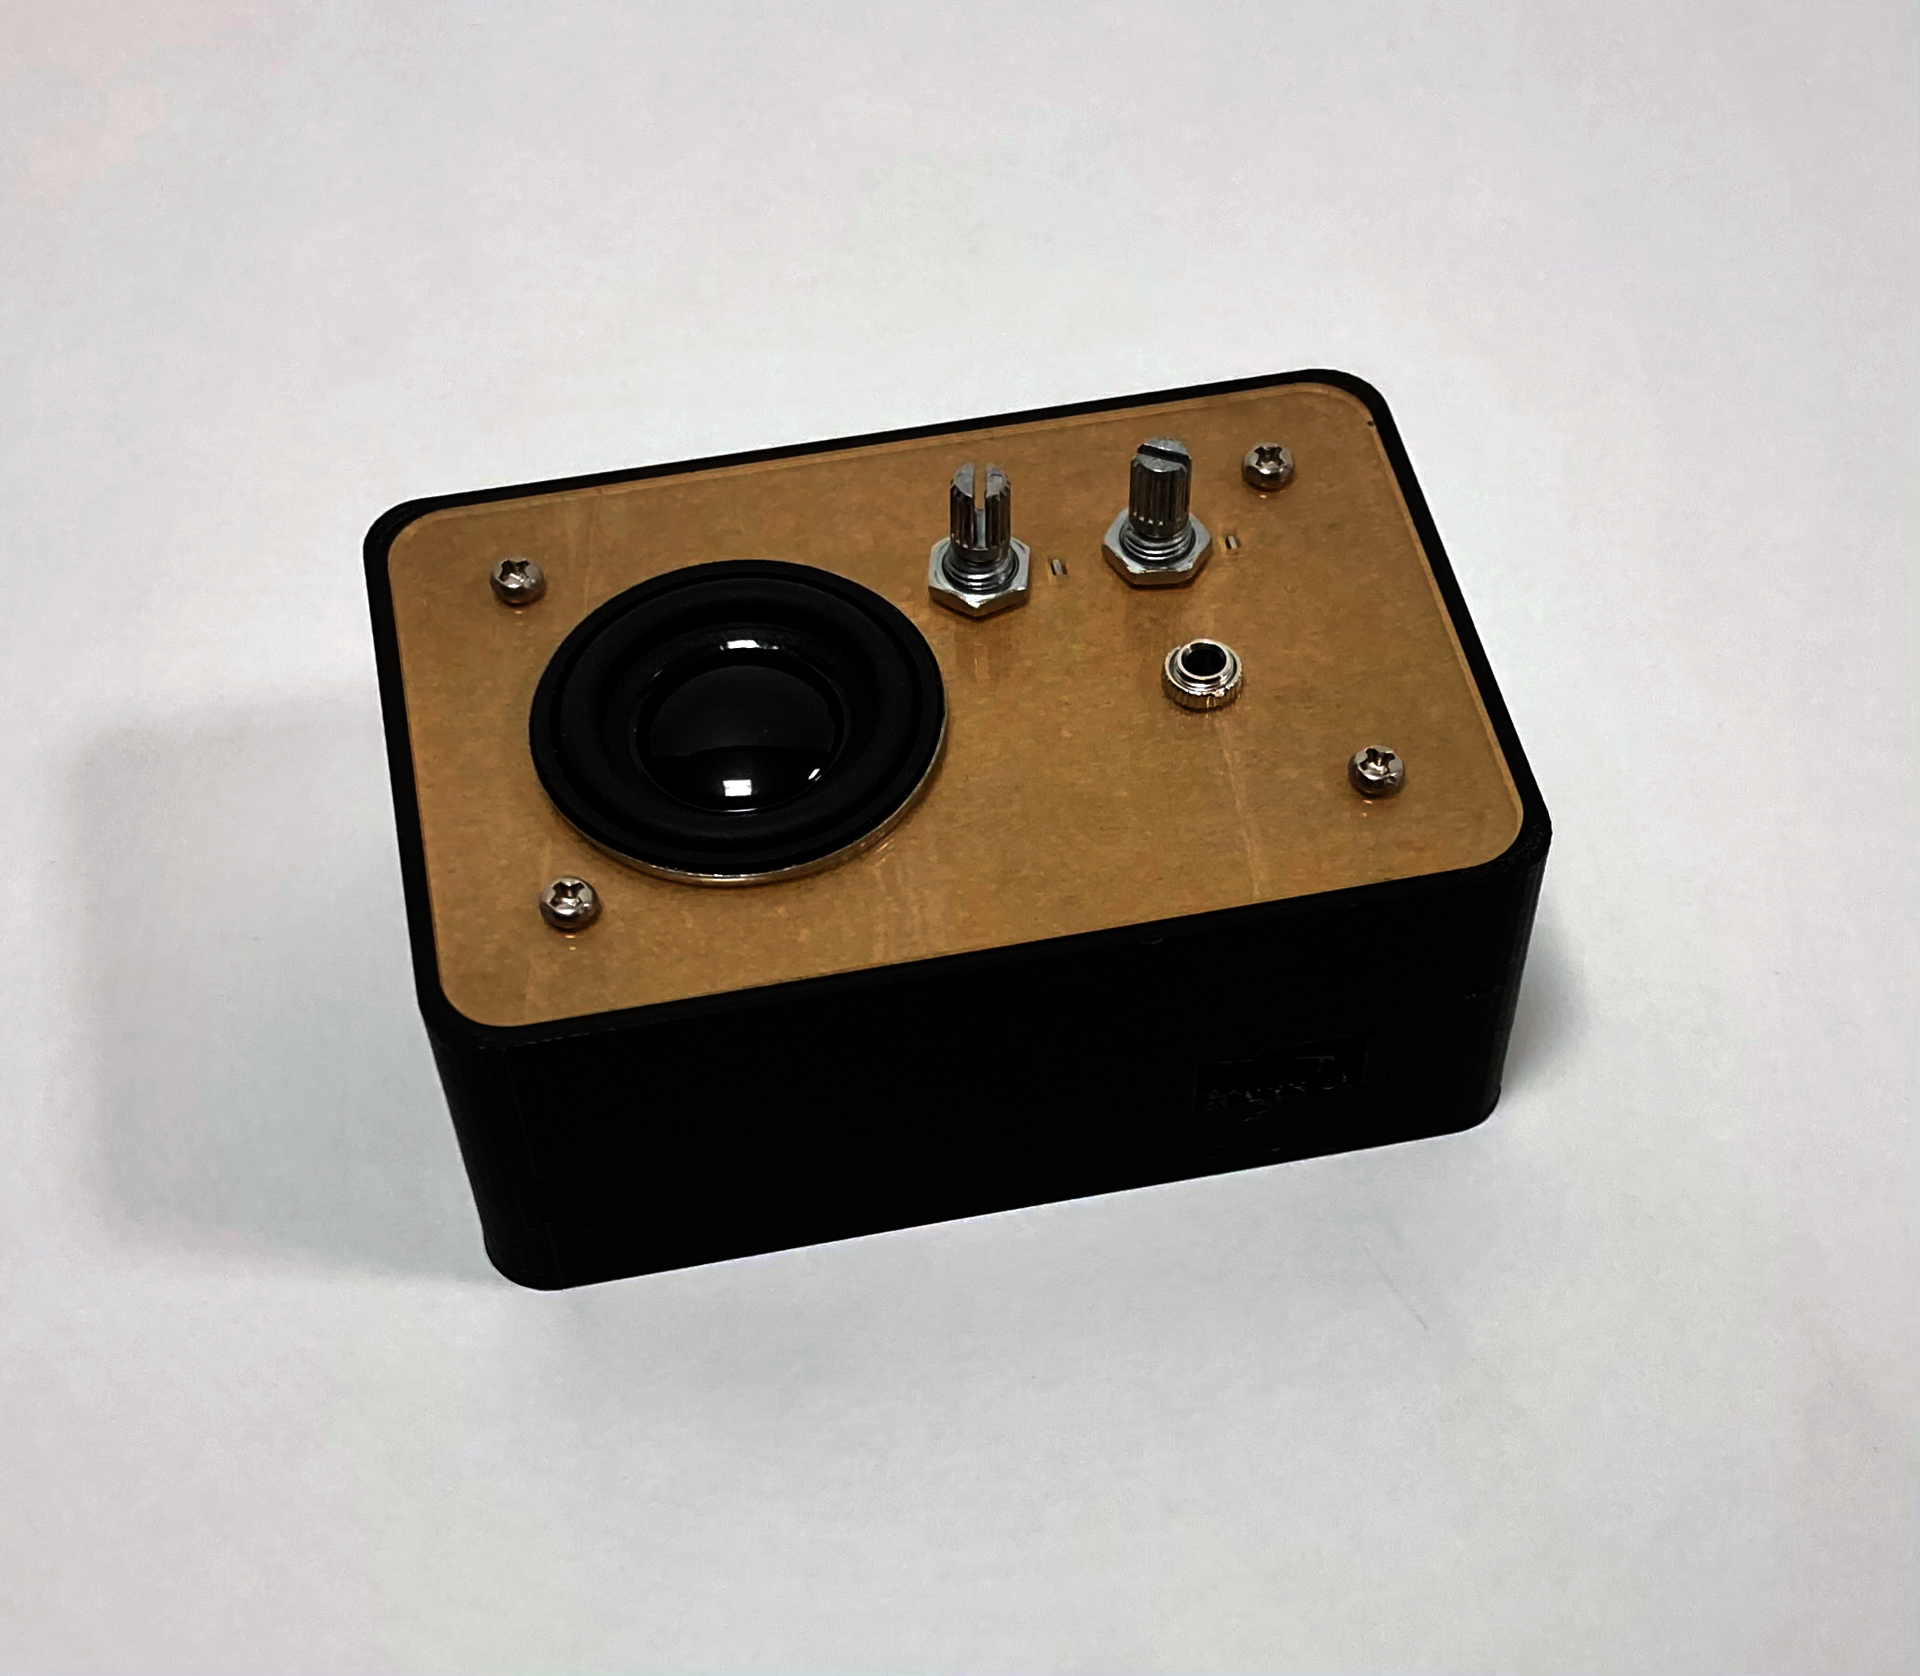 An instrument enclosed in a black plastic box, with a small speaker and two knobs visible on the top face.